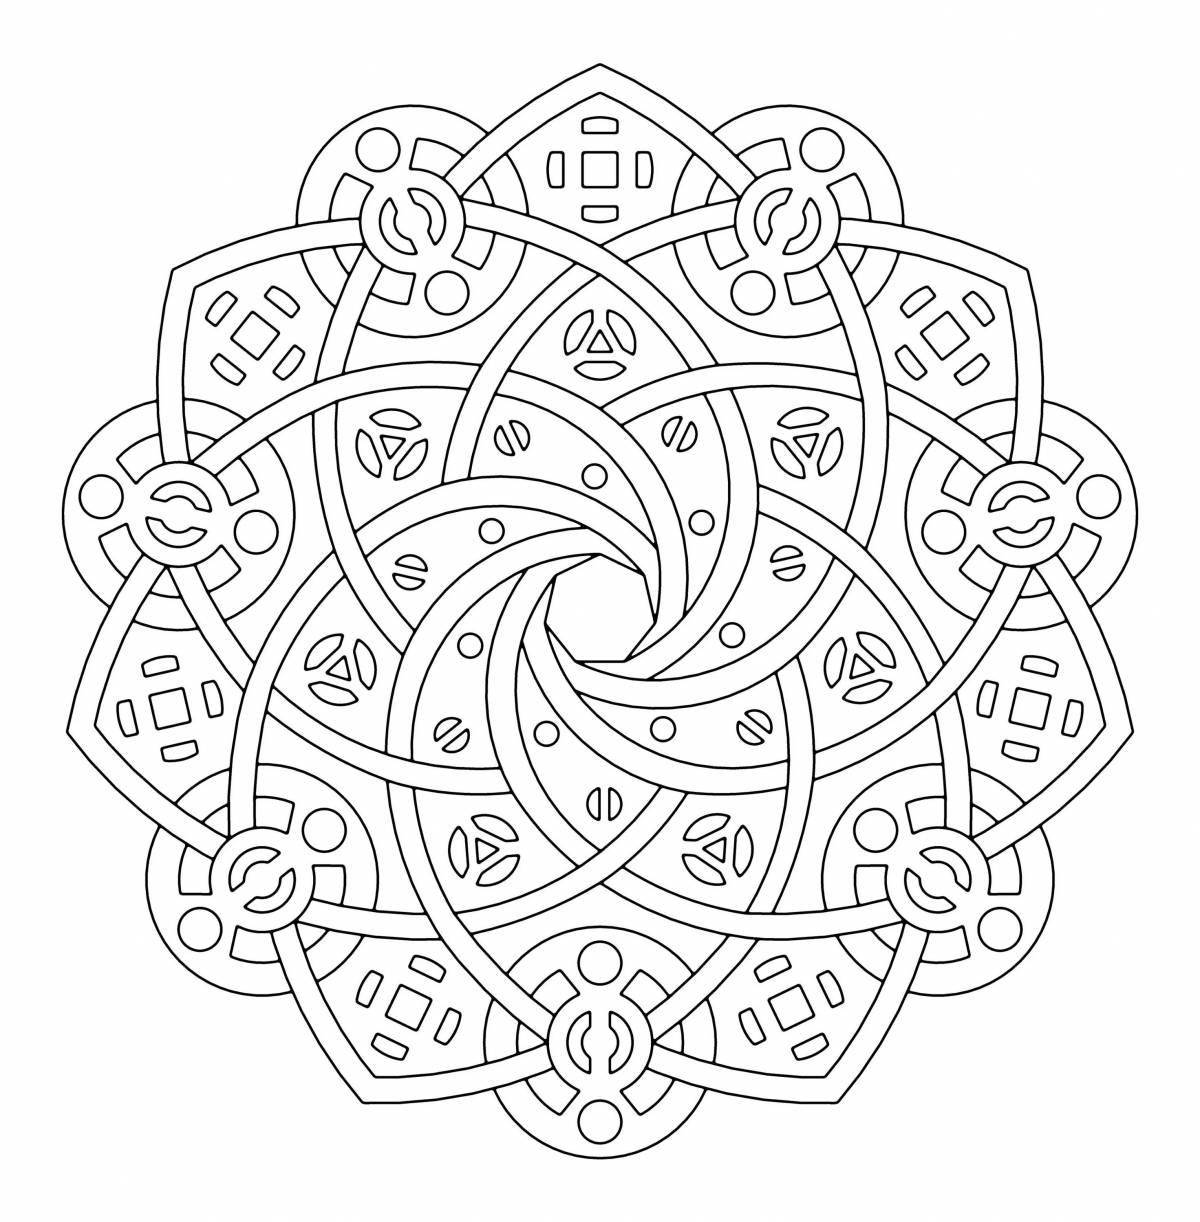 Inspirational mantra coloring pages for kids